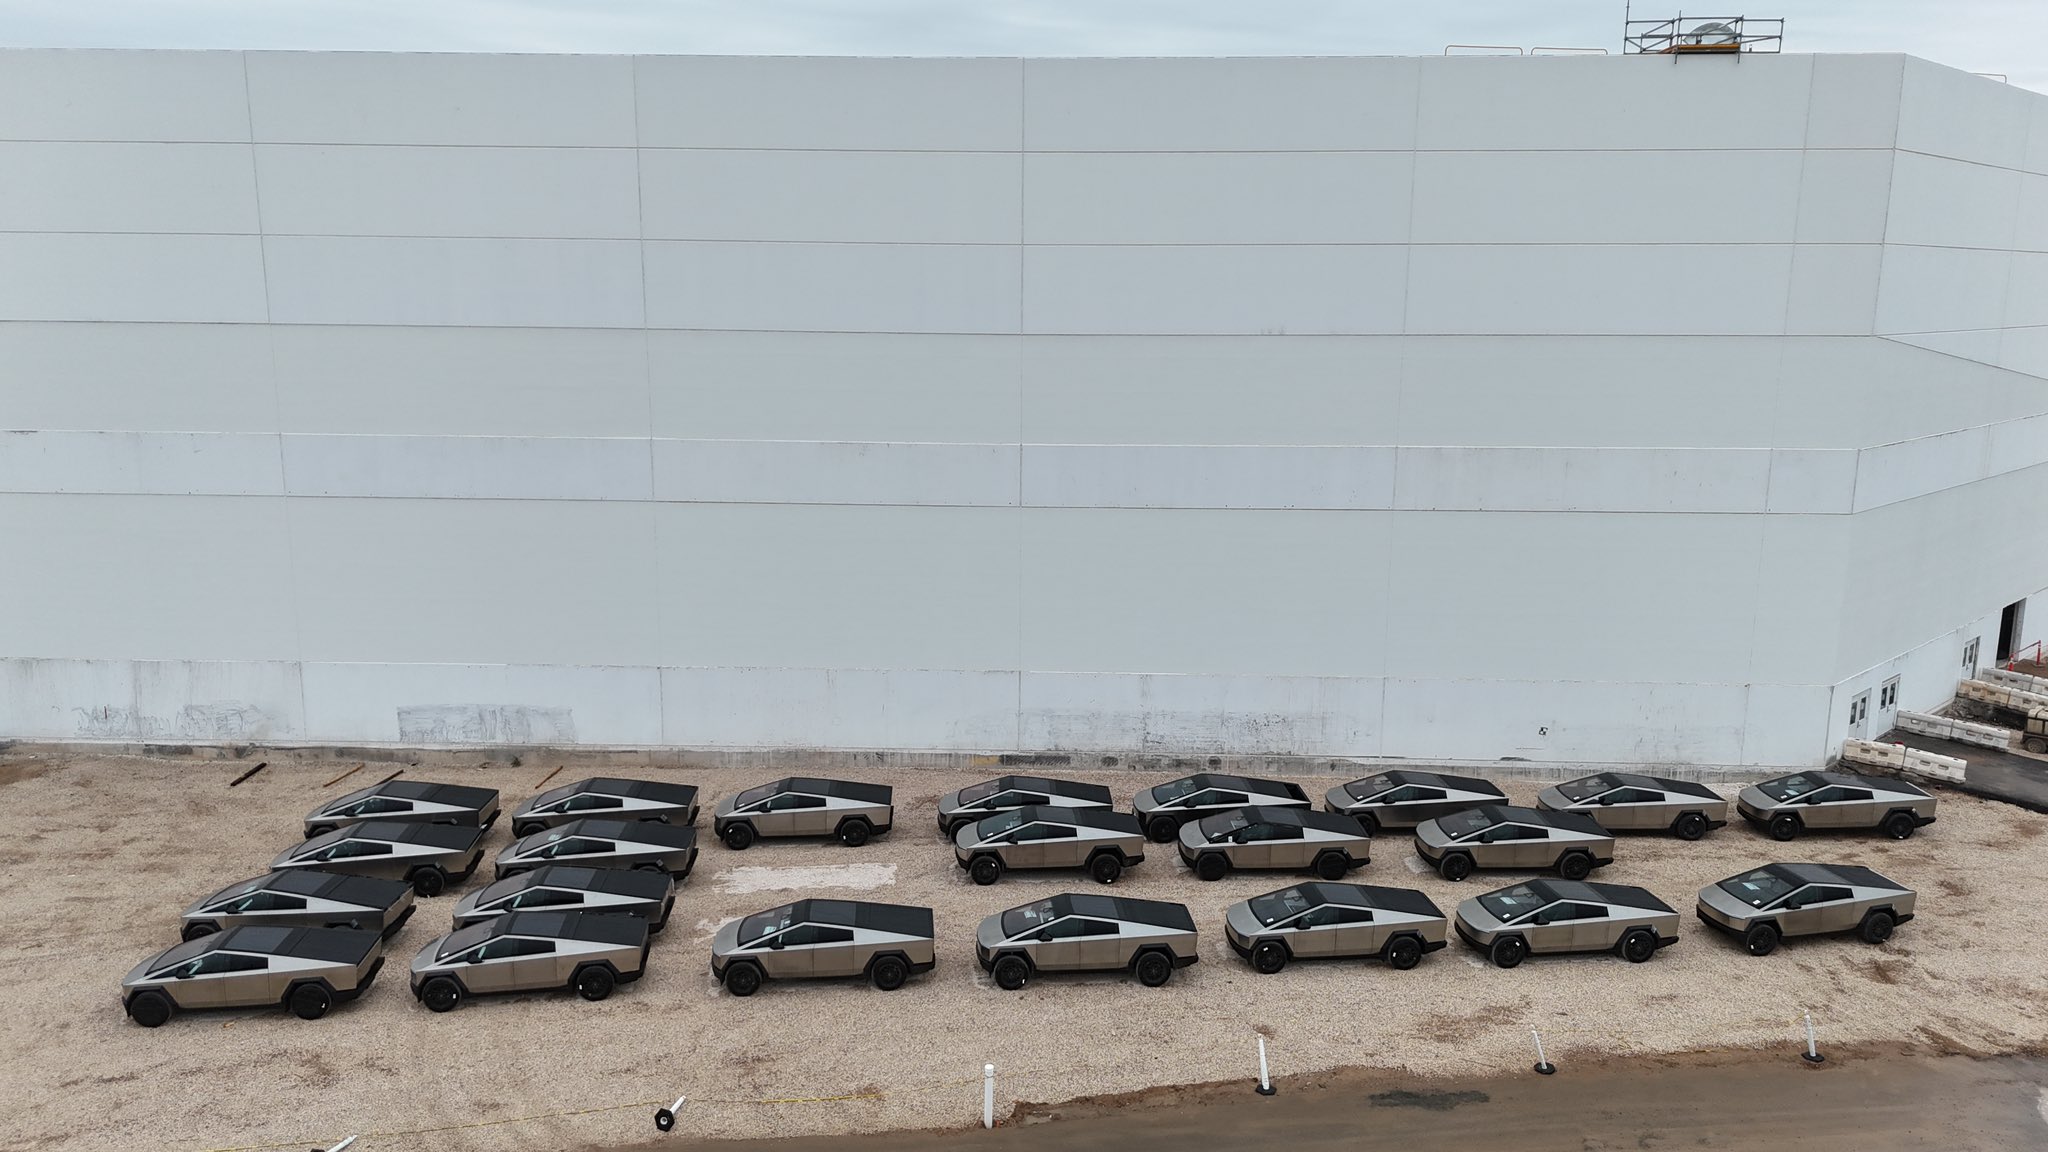 Several Tesla Cybertrucks seen at Giga Texas as orders start going out